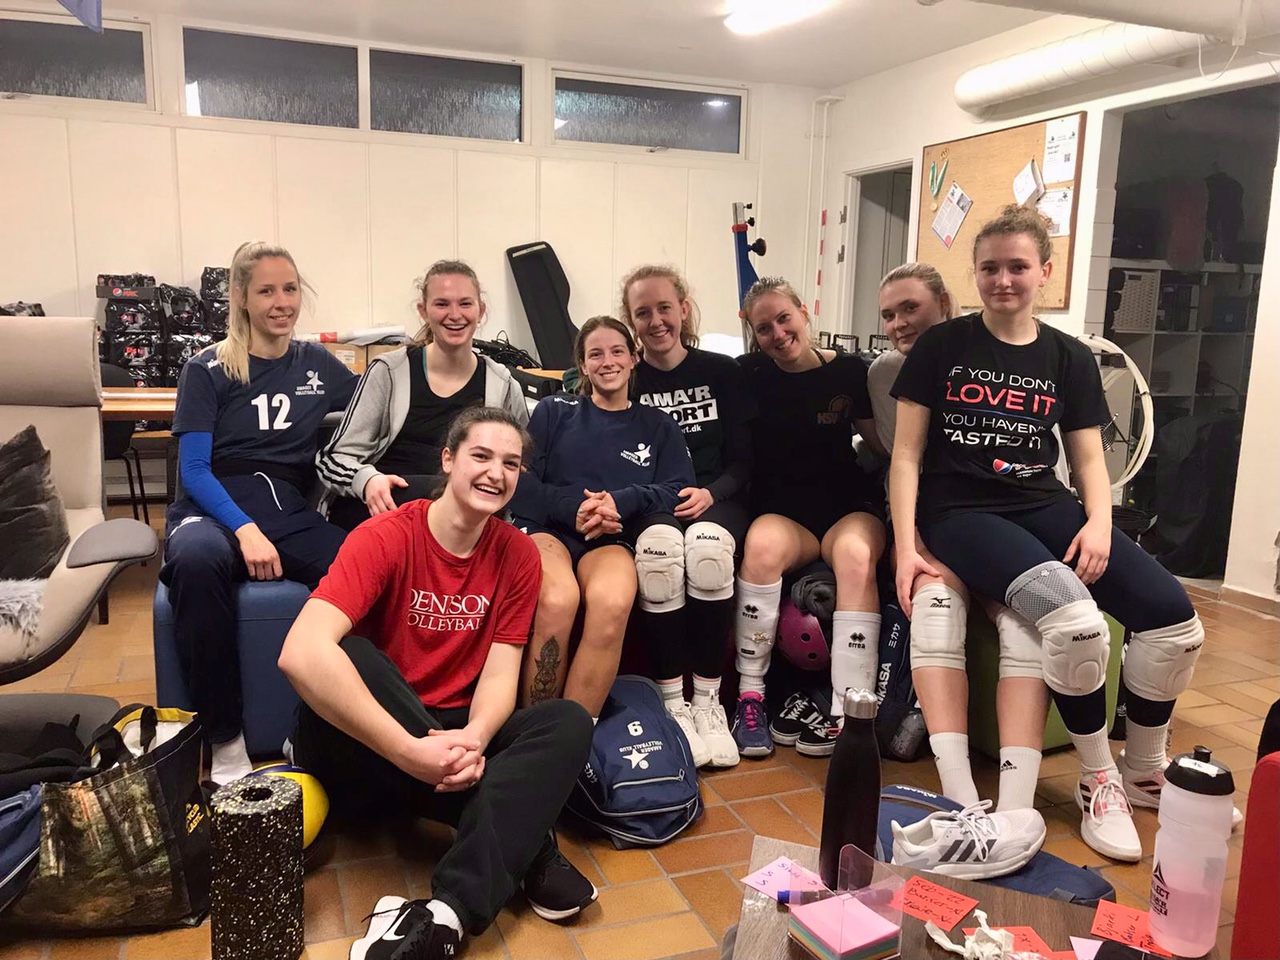 Lucy Anderson, wearing a Denison T-shirt, stayed in game shape while training with a club team in Copenhagen, Denmark. (Credit: Lucy Anderson)